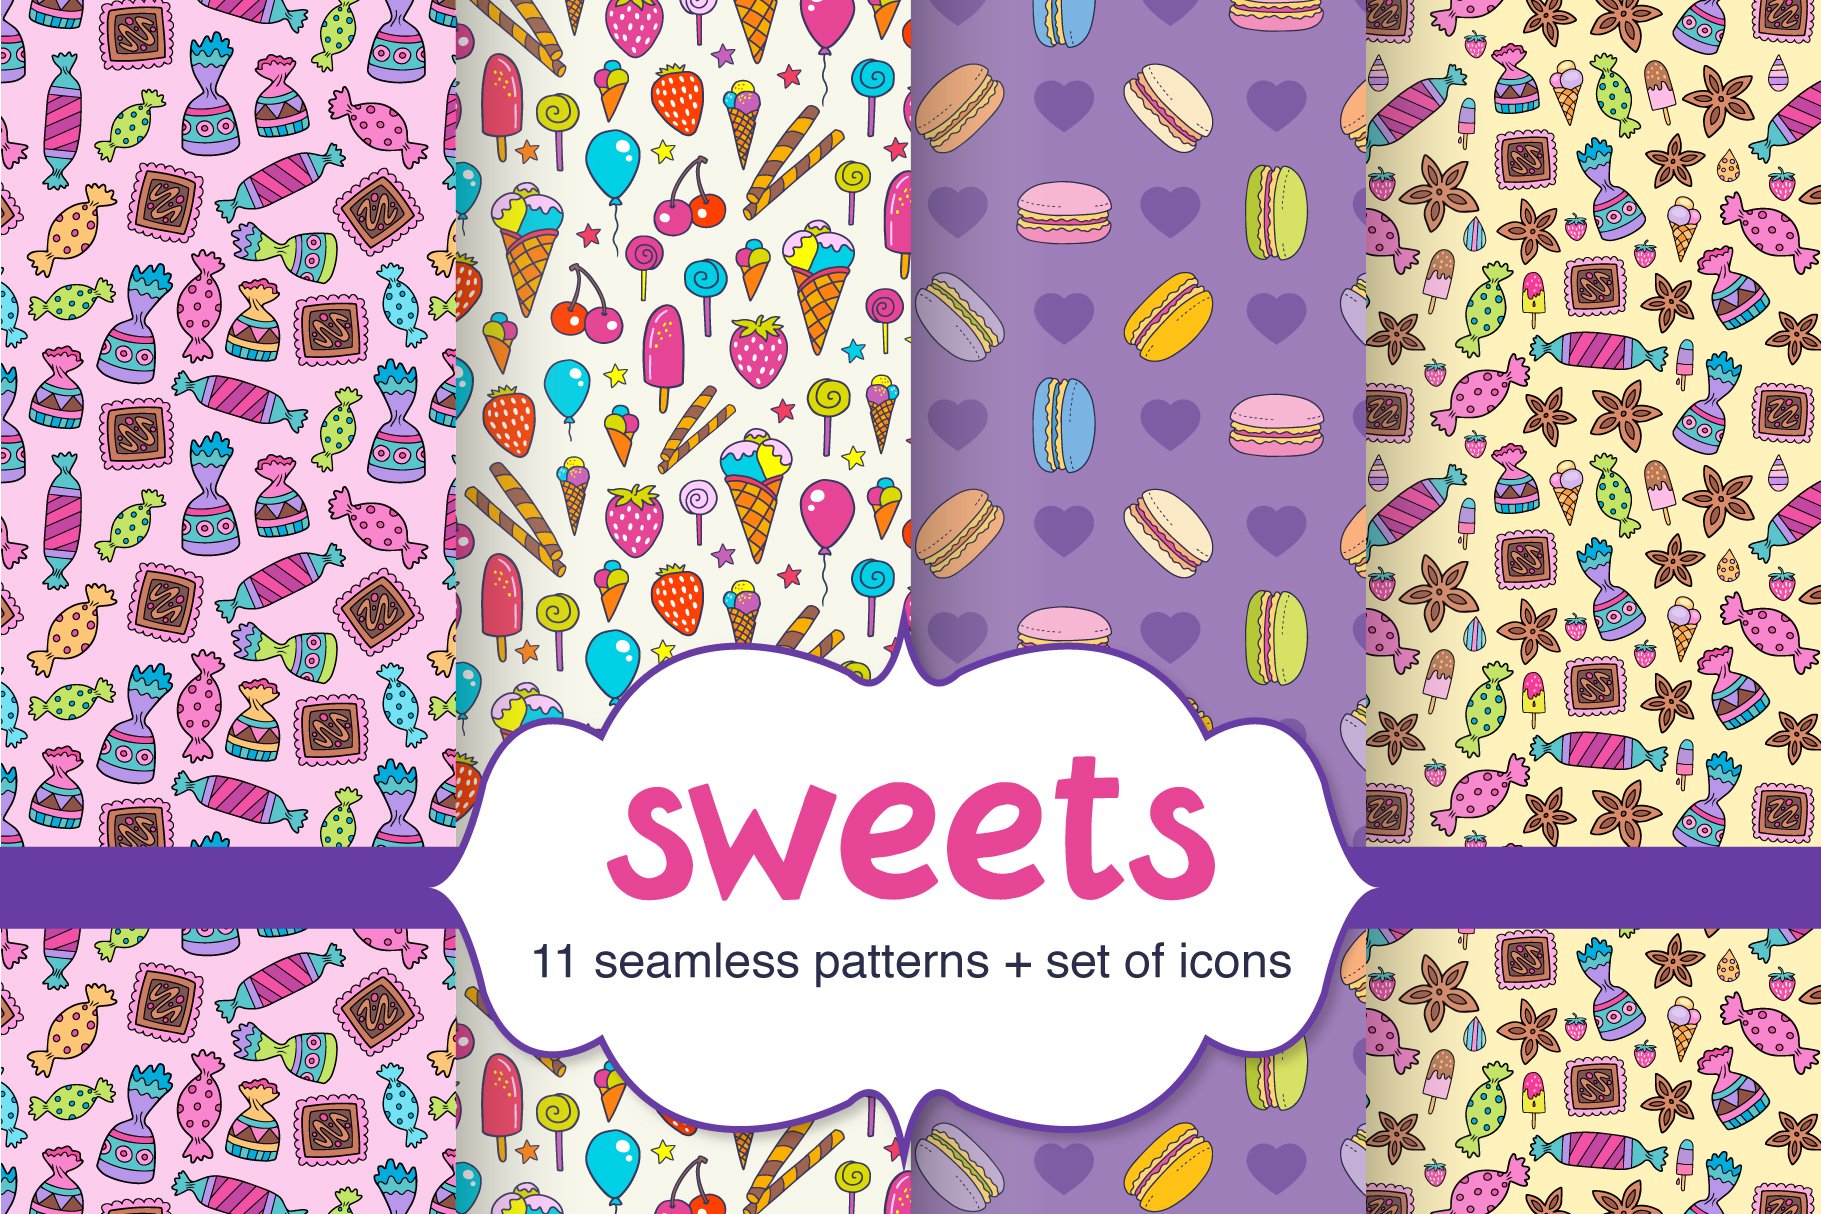 Sweet patterns and icons cover image.